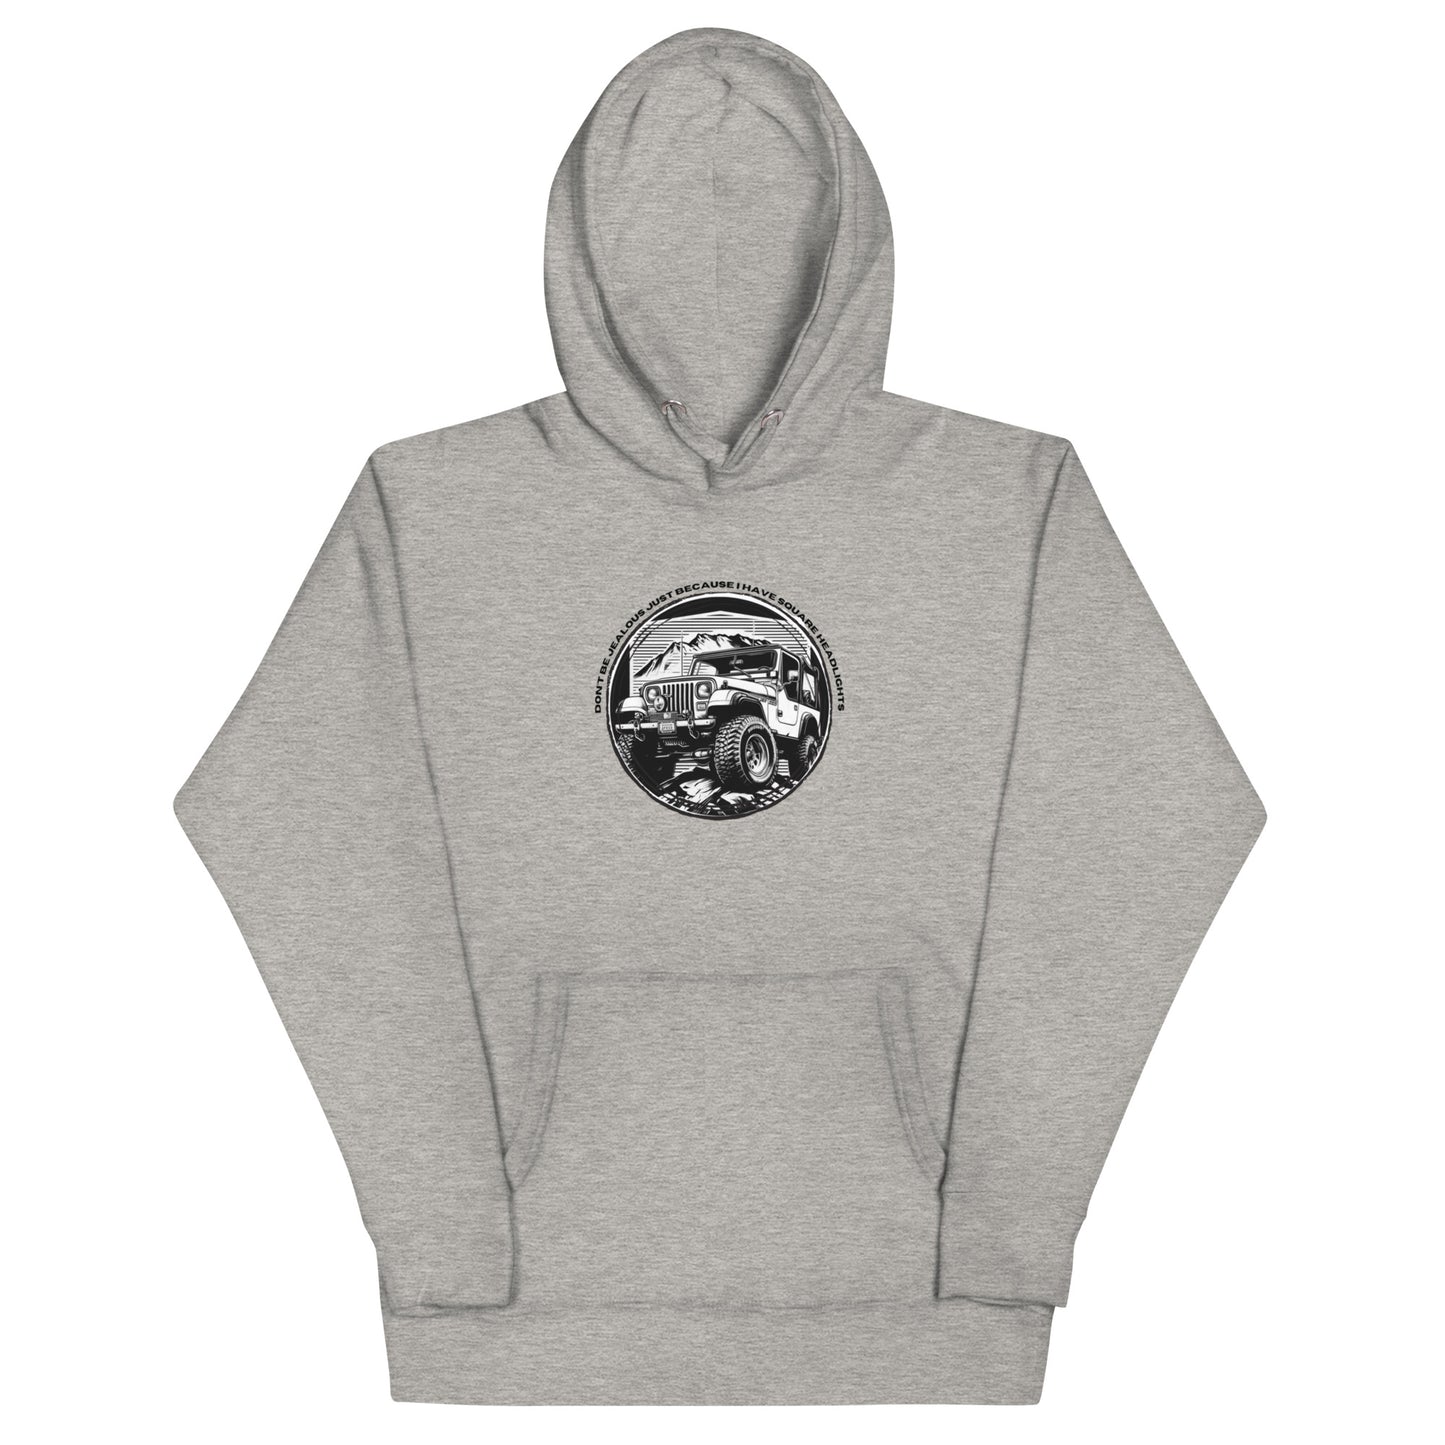 a gray hoodie with a black and white image of a truck